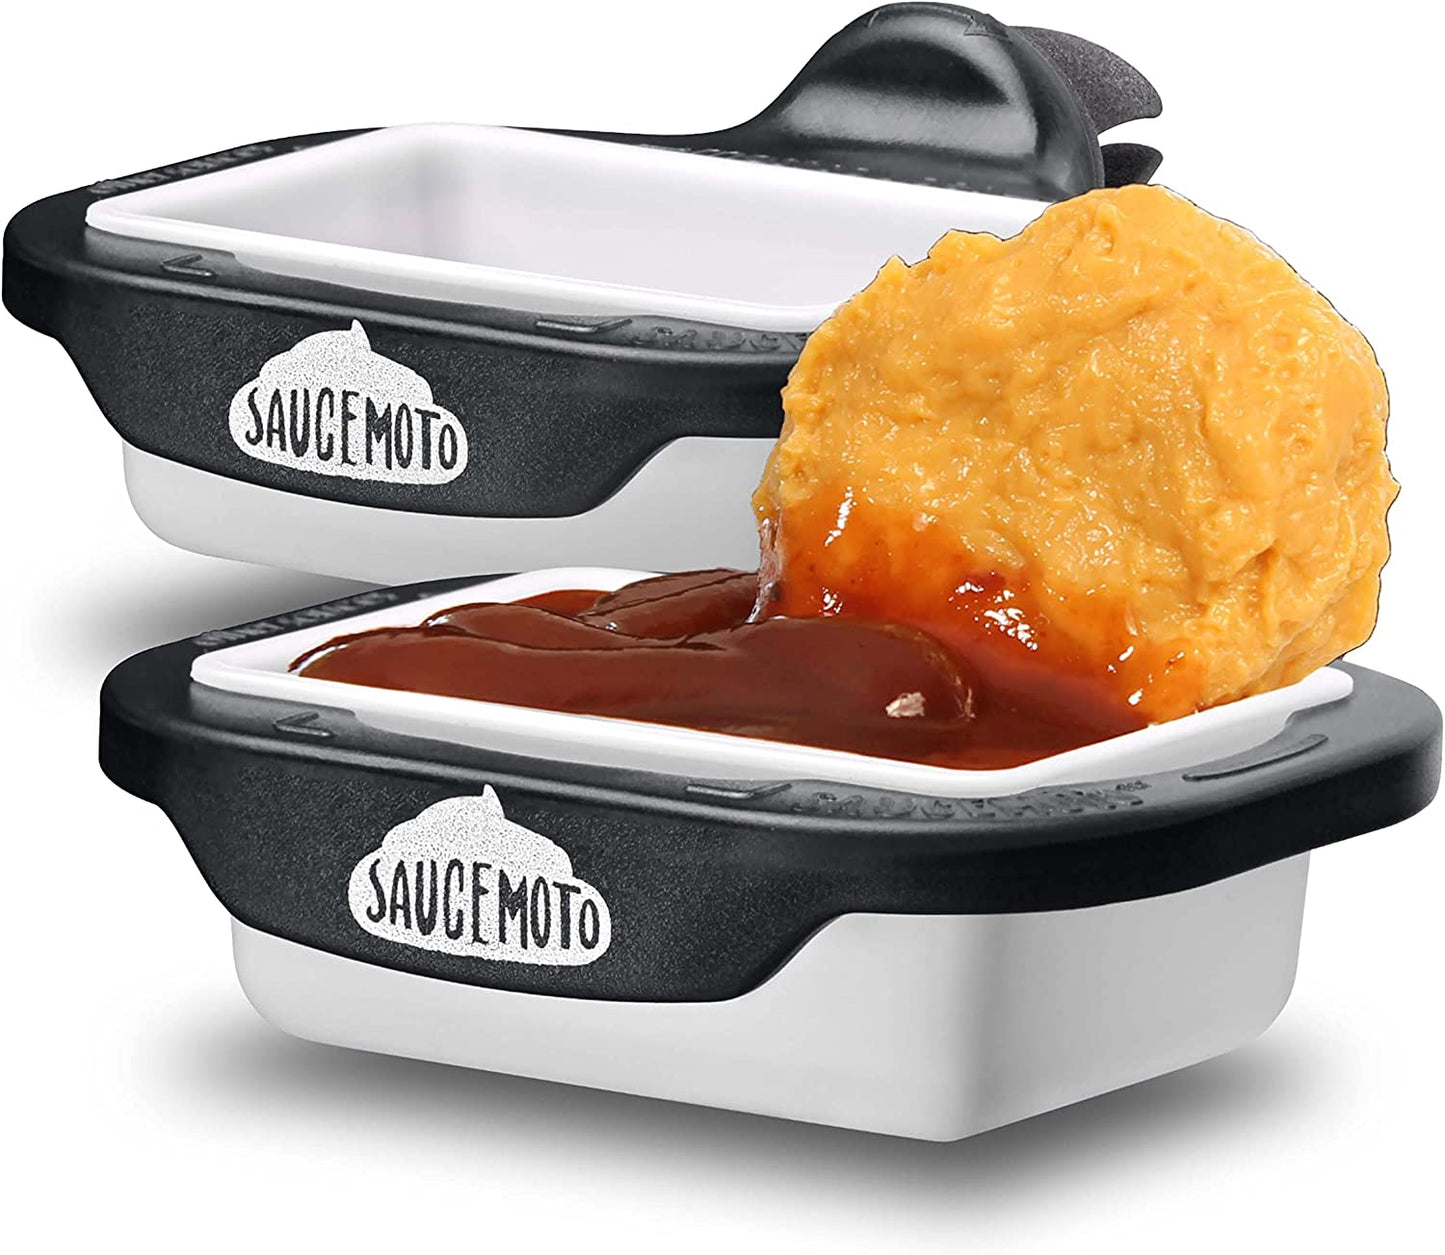 Dip Clip | an In-Car Sauce Holder for Ketchup and Dipping Sauces. as Seen on Shark Tank (2 Pack, Black)